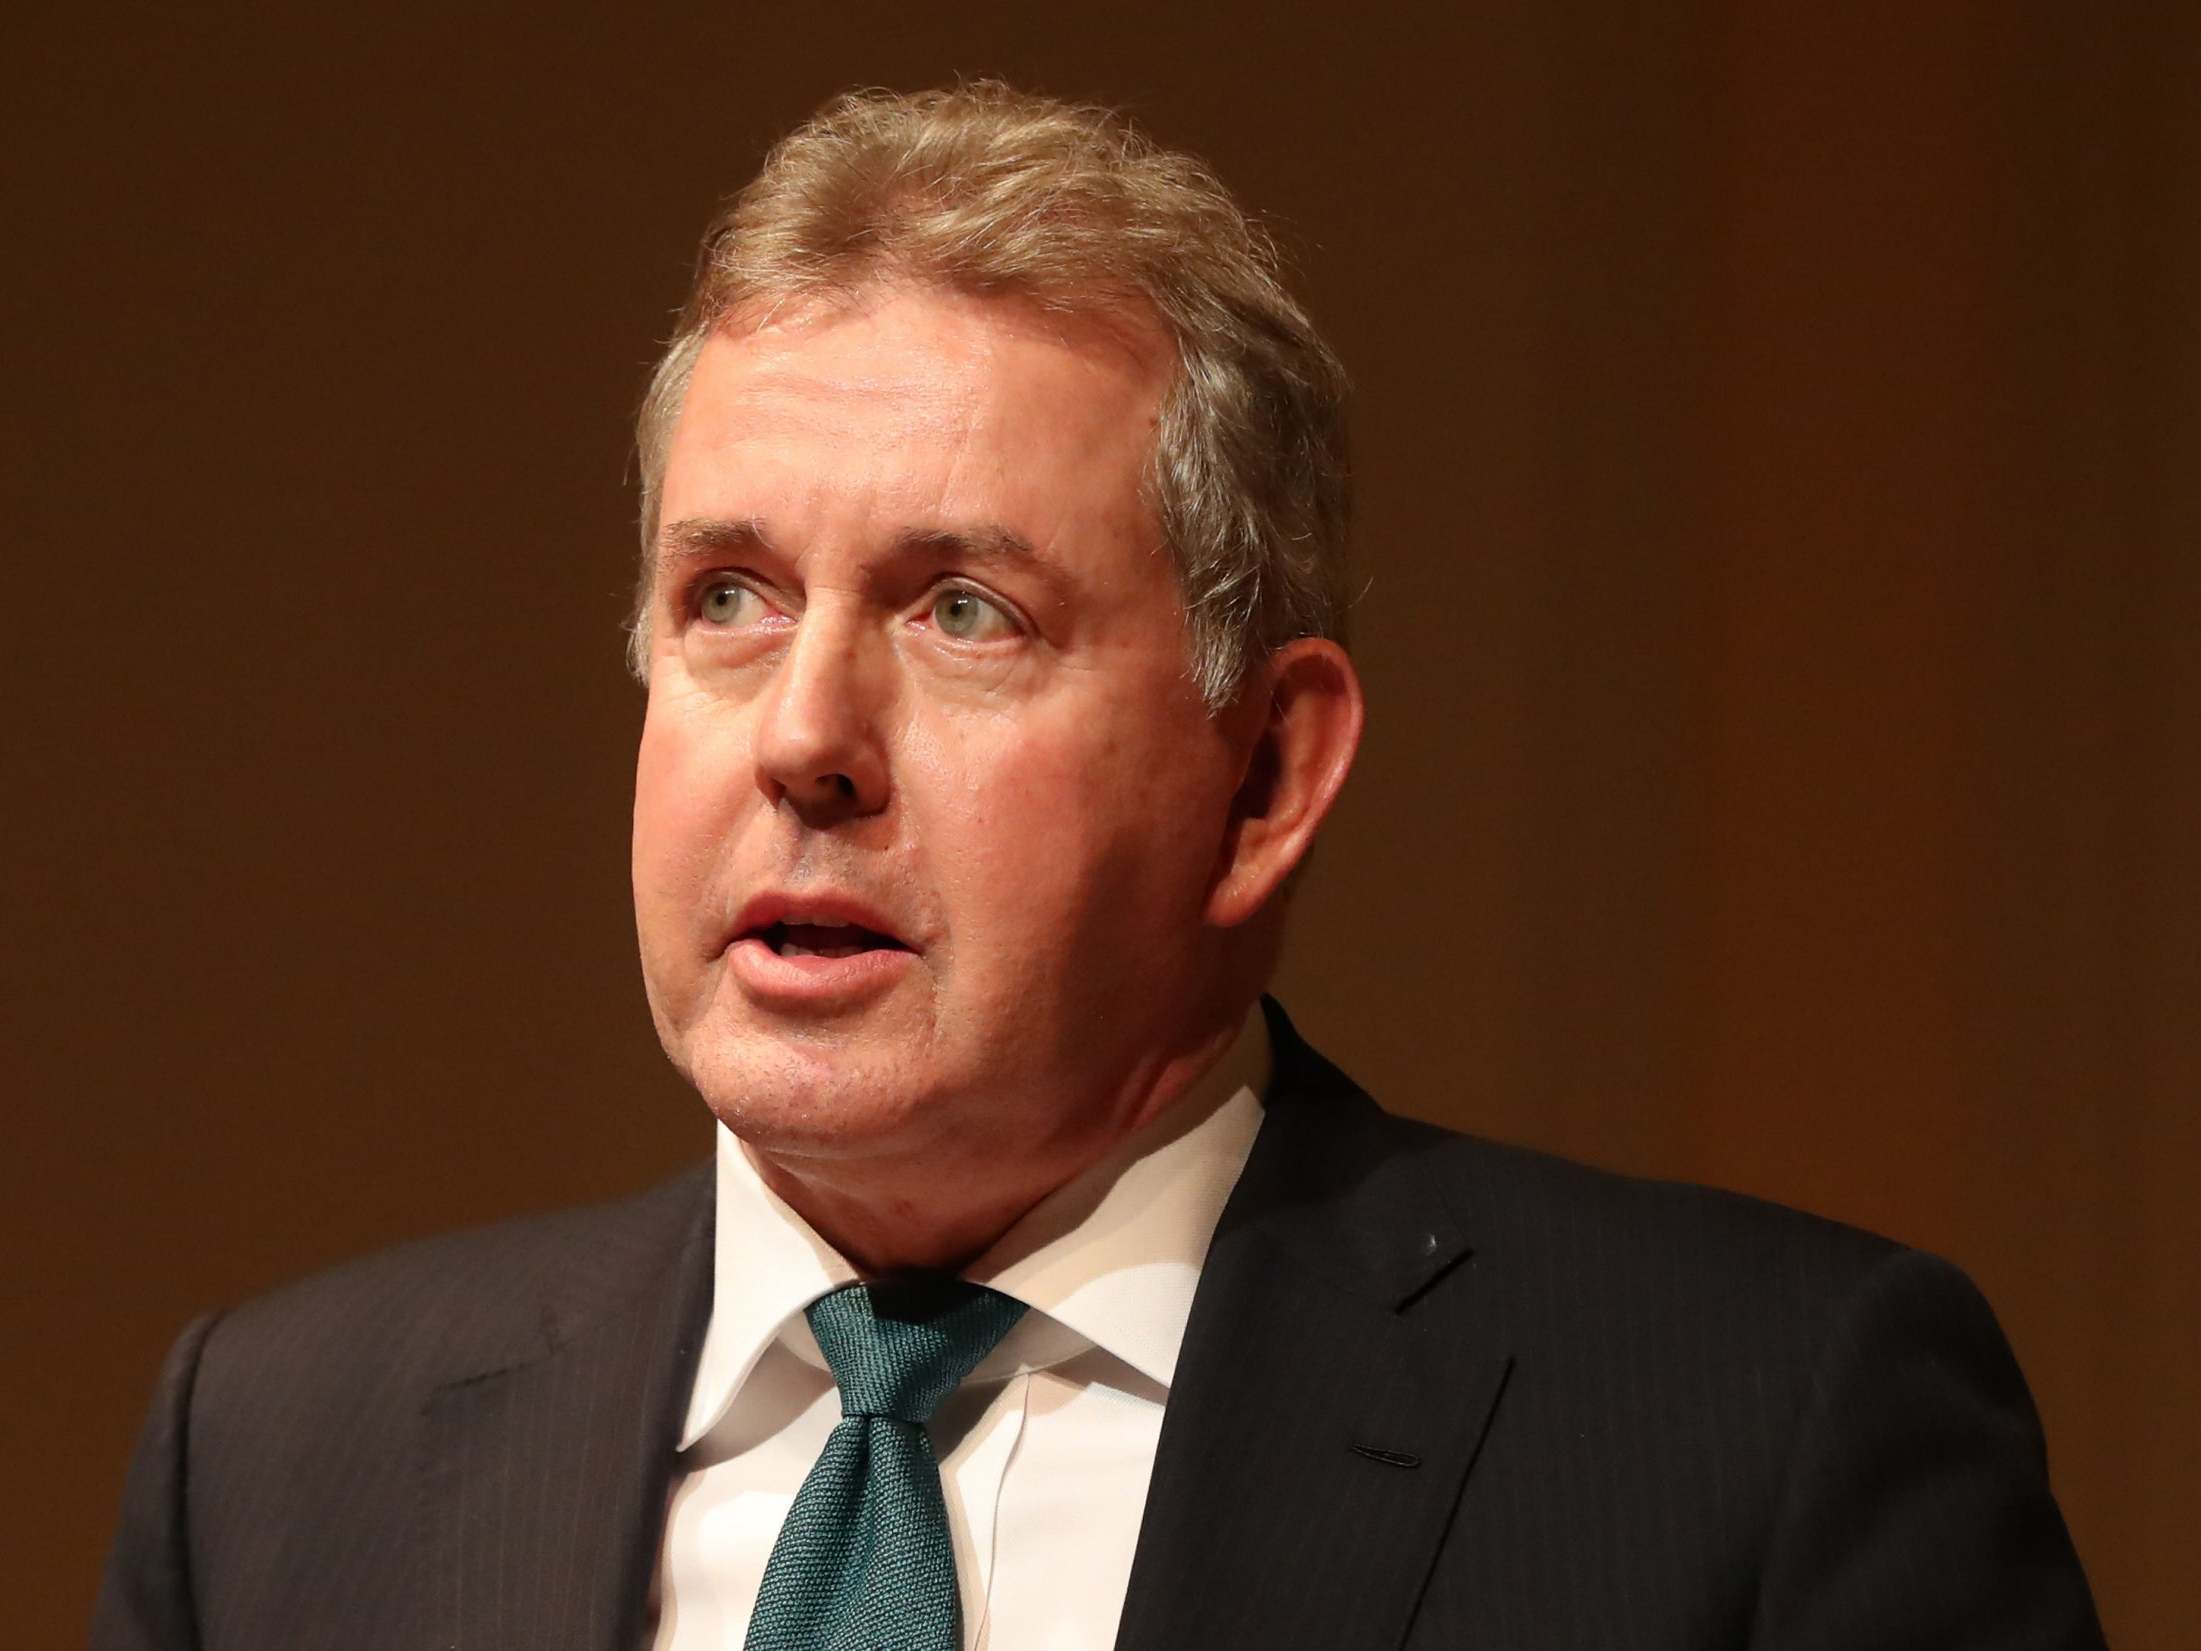 Boris Johnson faces backlash over revelation Kim Darroch quit because he refused to support him over Trump email leak